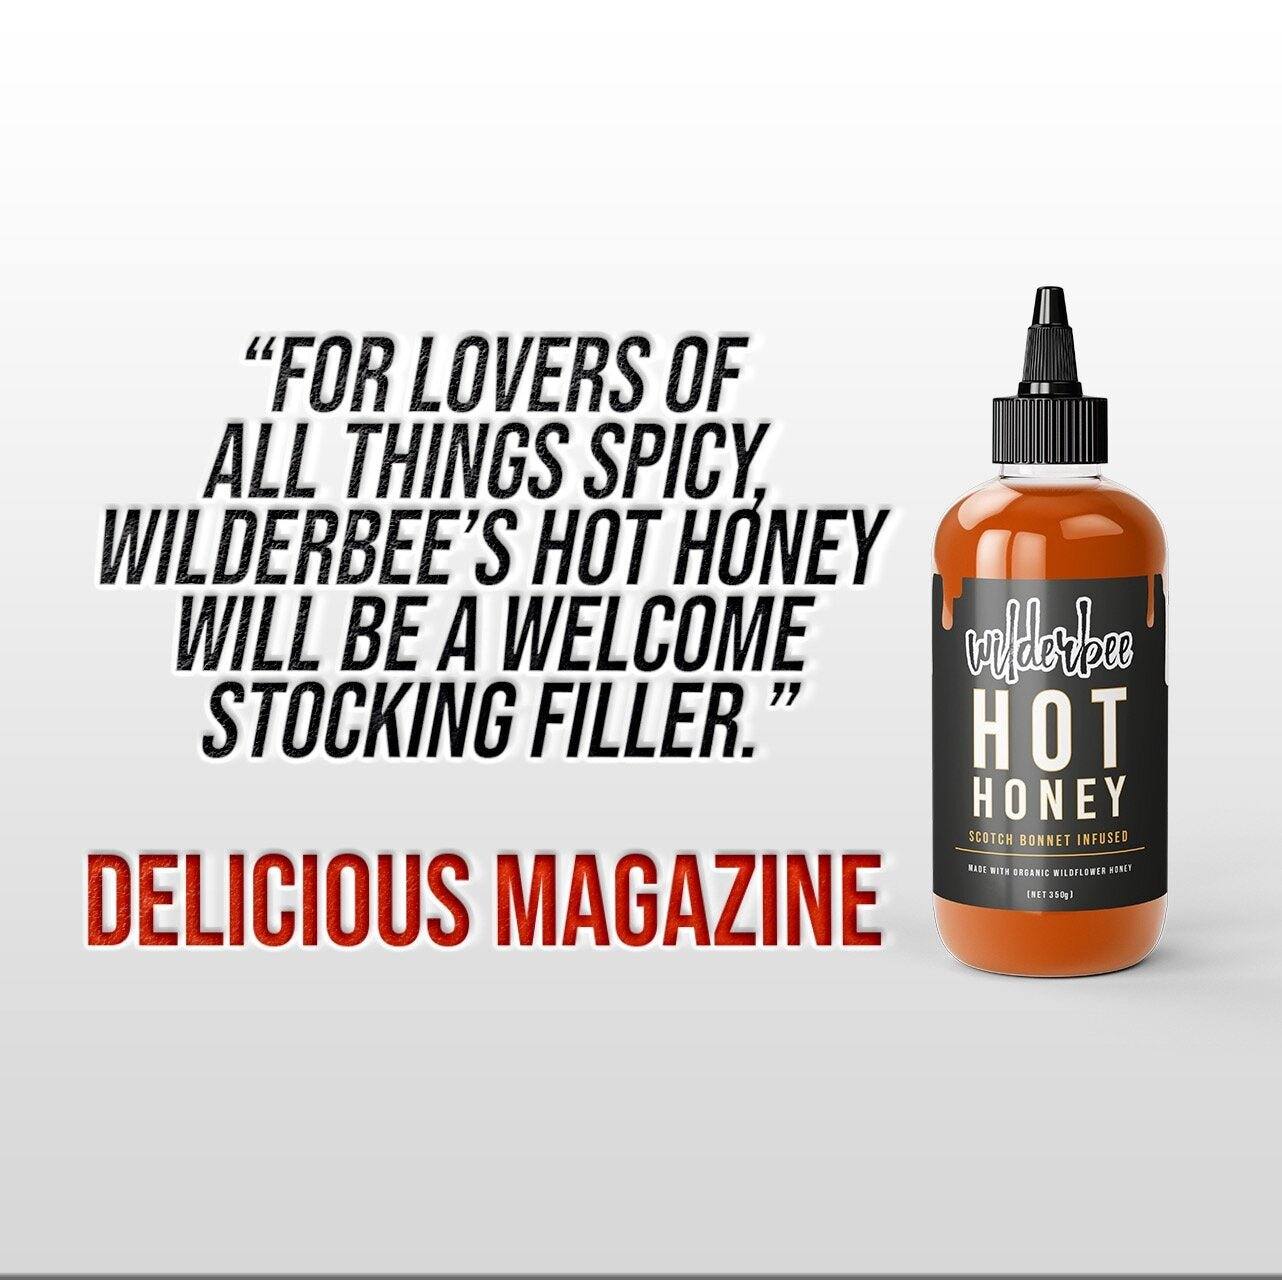 Hot Honey | 260g | Wilderbee | Scotch Bonnet Infused - One Stop Chilli Shop